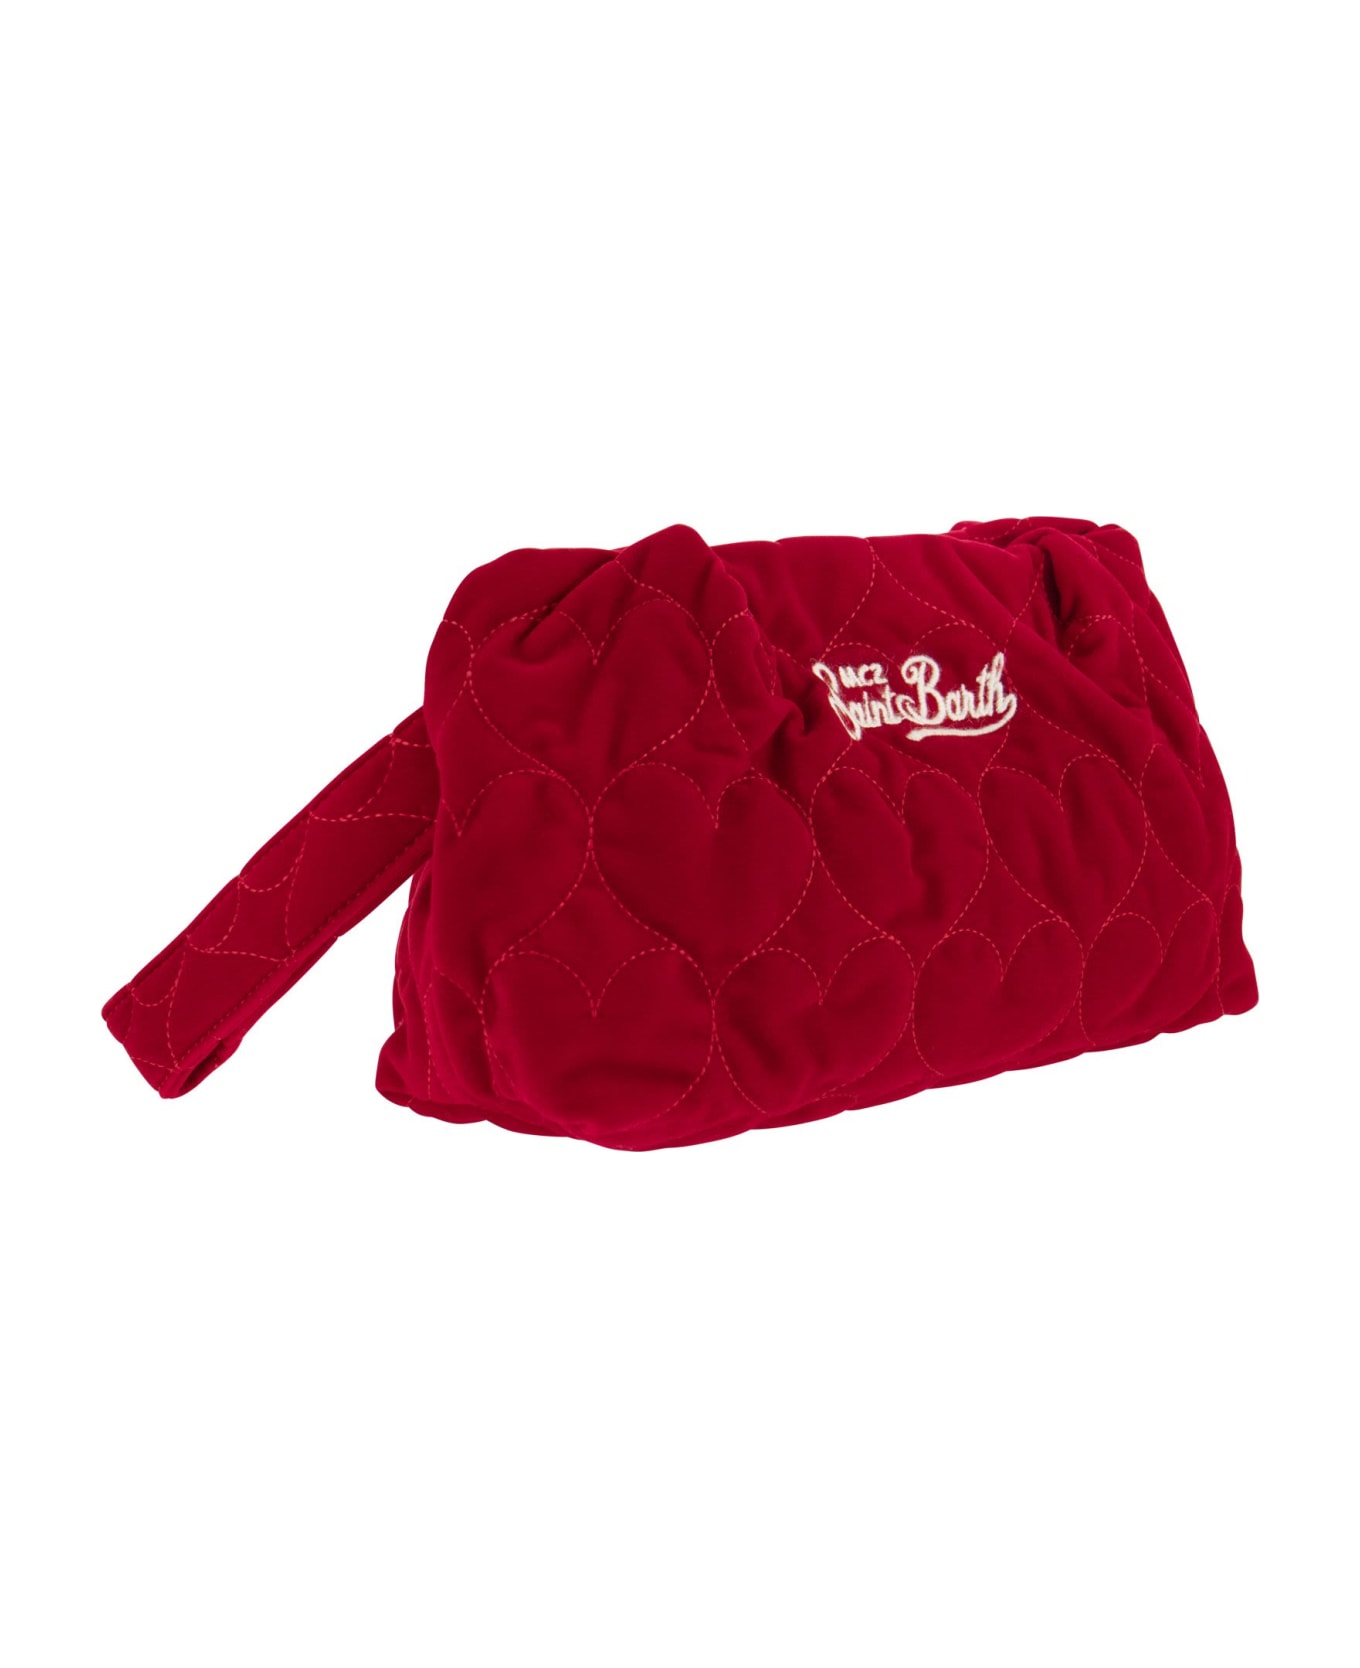 MC2 Saint Barth Quilted Velvet Clutch Bag - Red